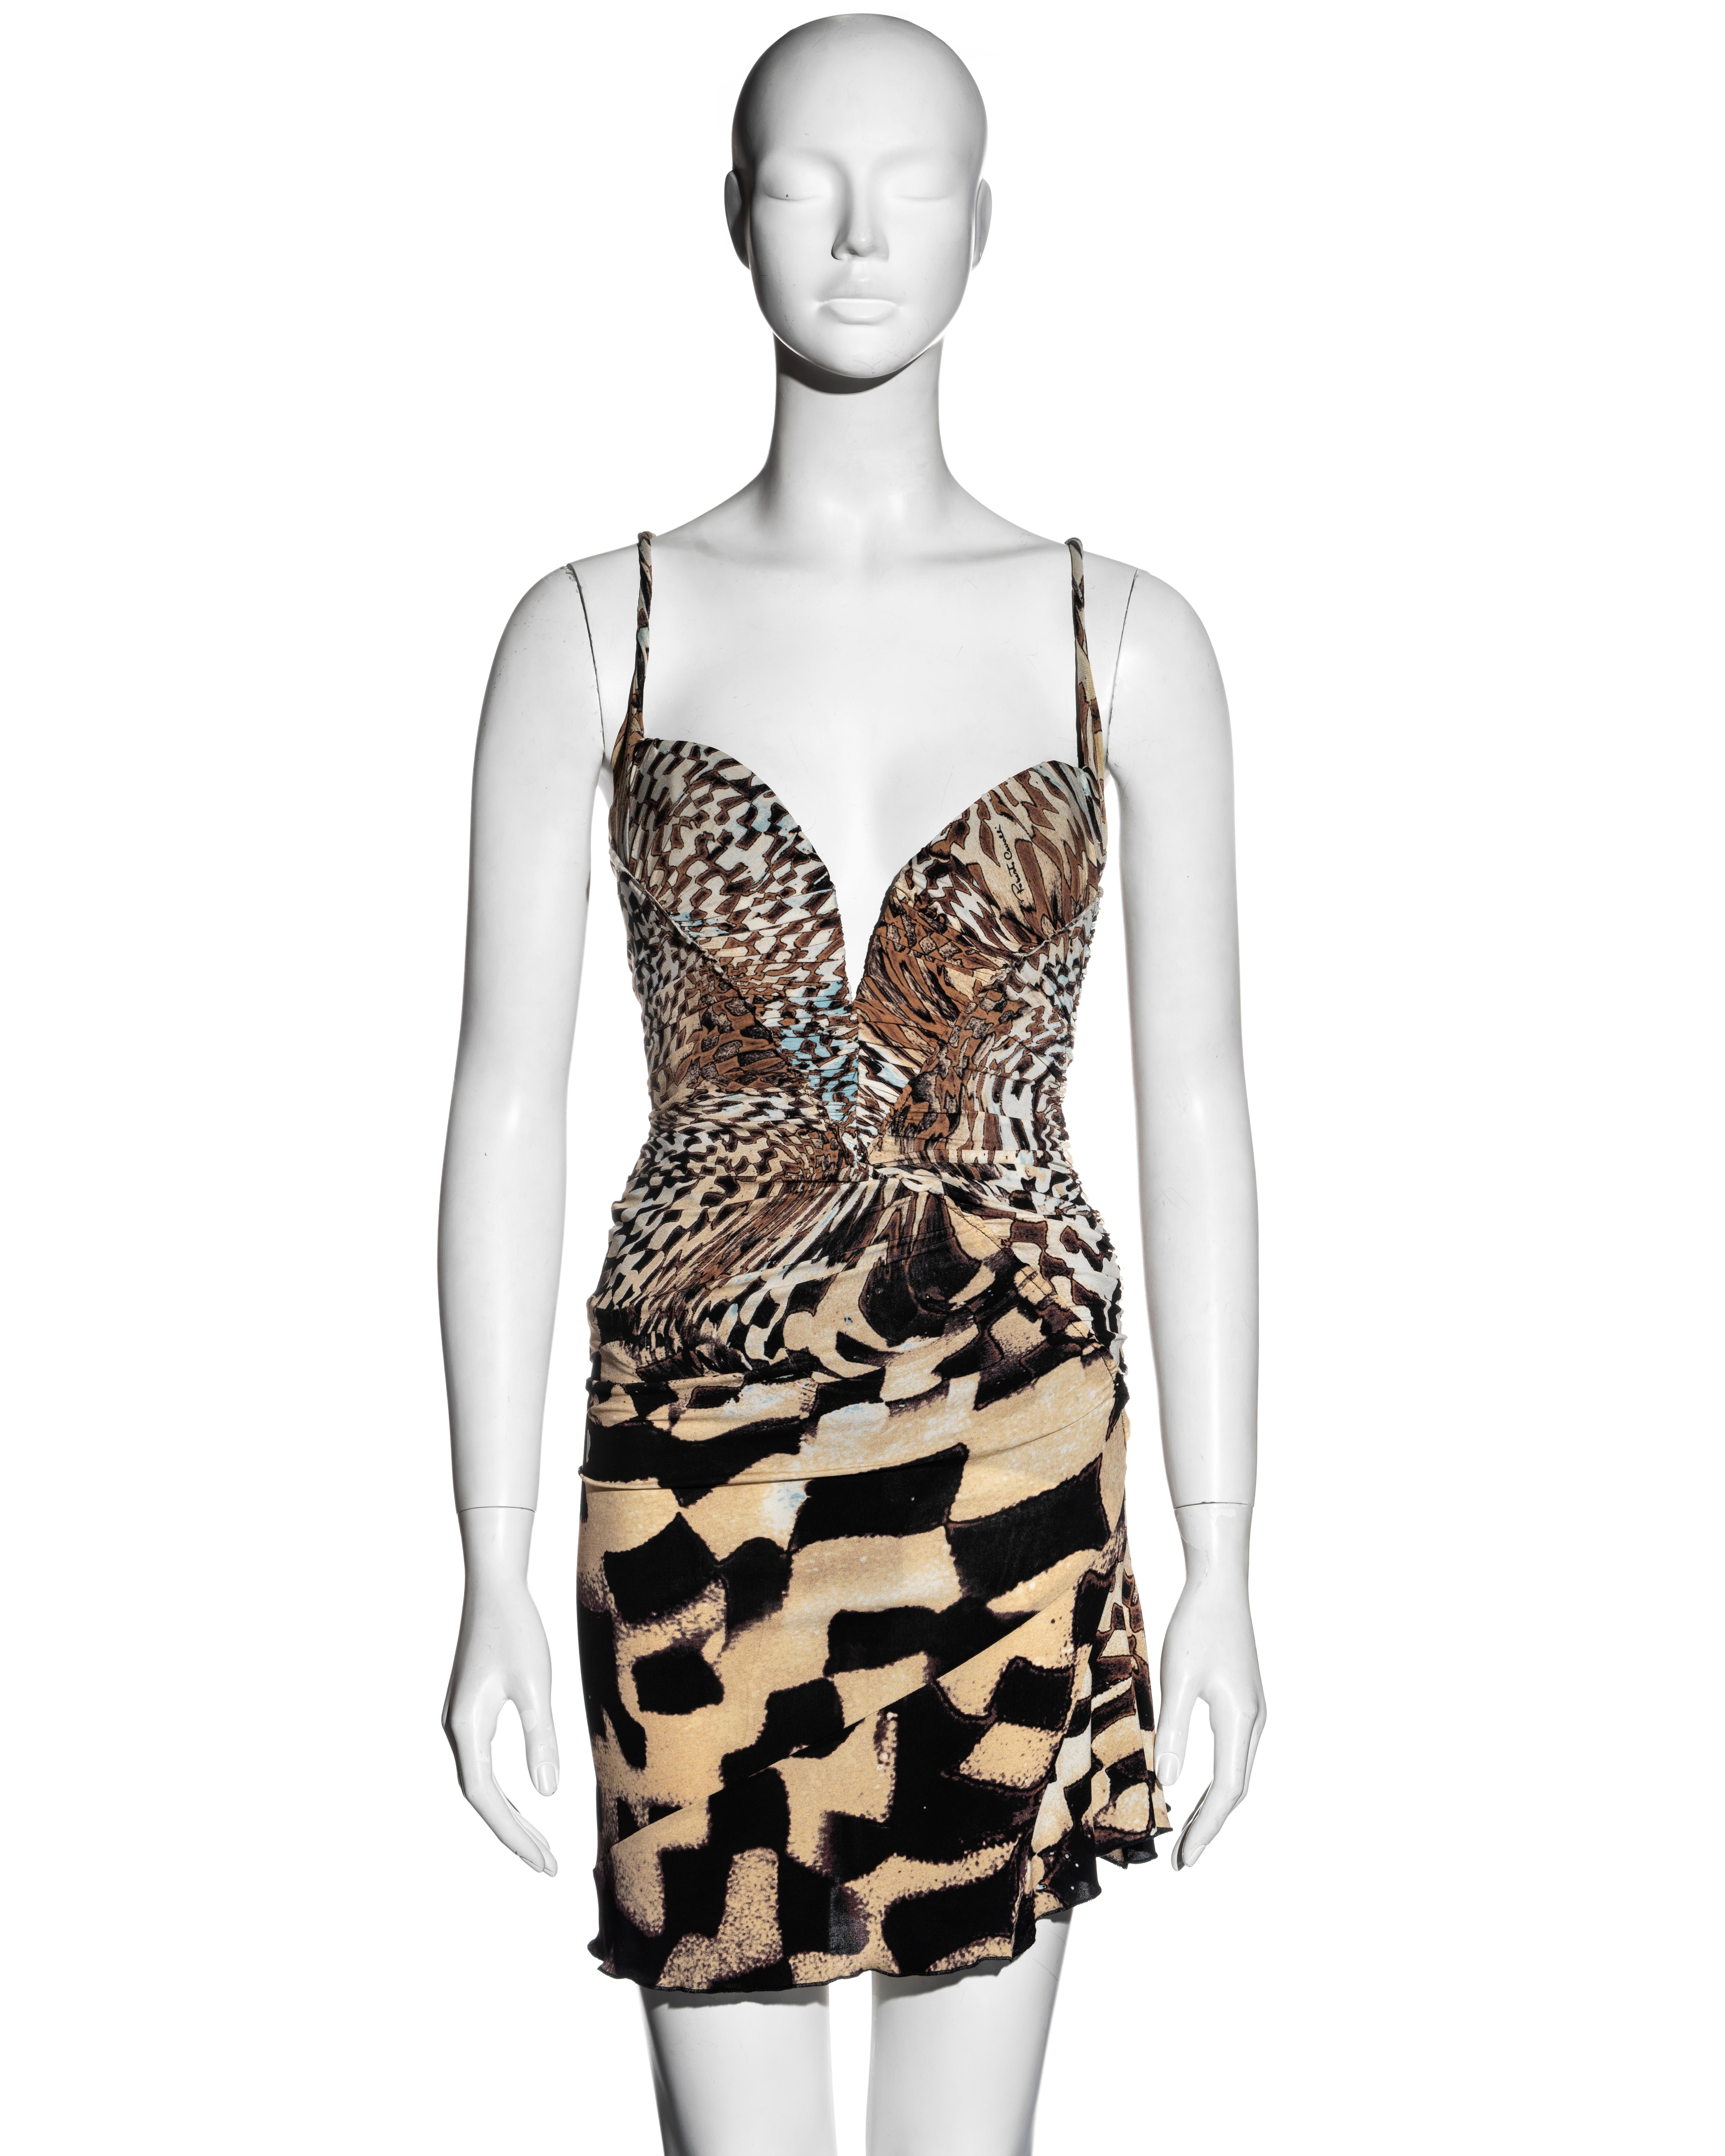 ▪ Roberto Cavalli beige printed silk jersey mini dress
▪ Fall-Winter 2003
▪ Built-in corset, bra and bodysuit 
▪ Ruched bodice 
▪ Rolled shoulder straps
▪ Asymmetric hemline 
▪ Gold-tone metal zipper at the centre-back
▪ Size Small
▪ Made in